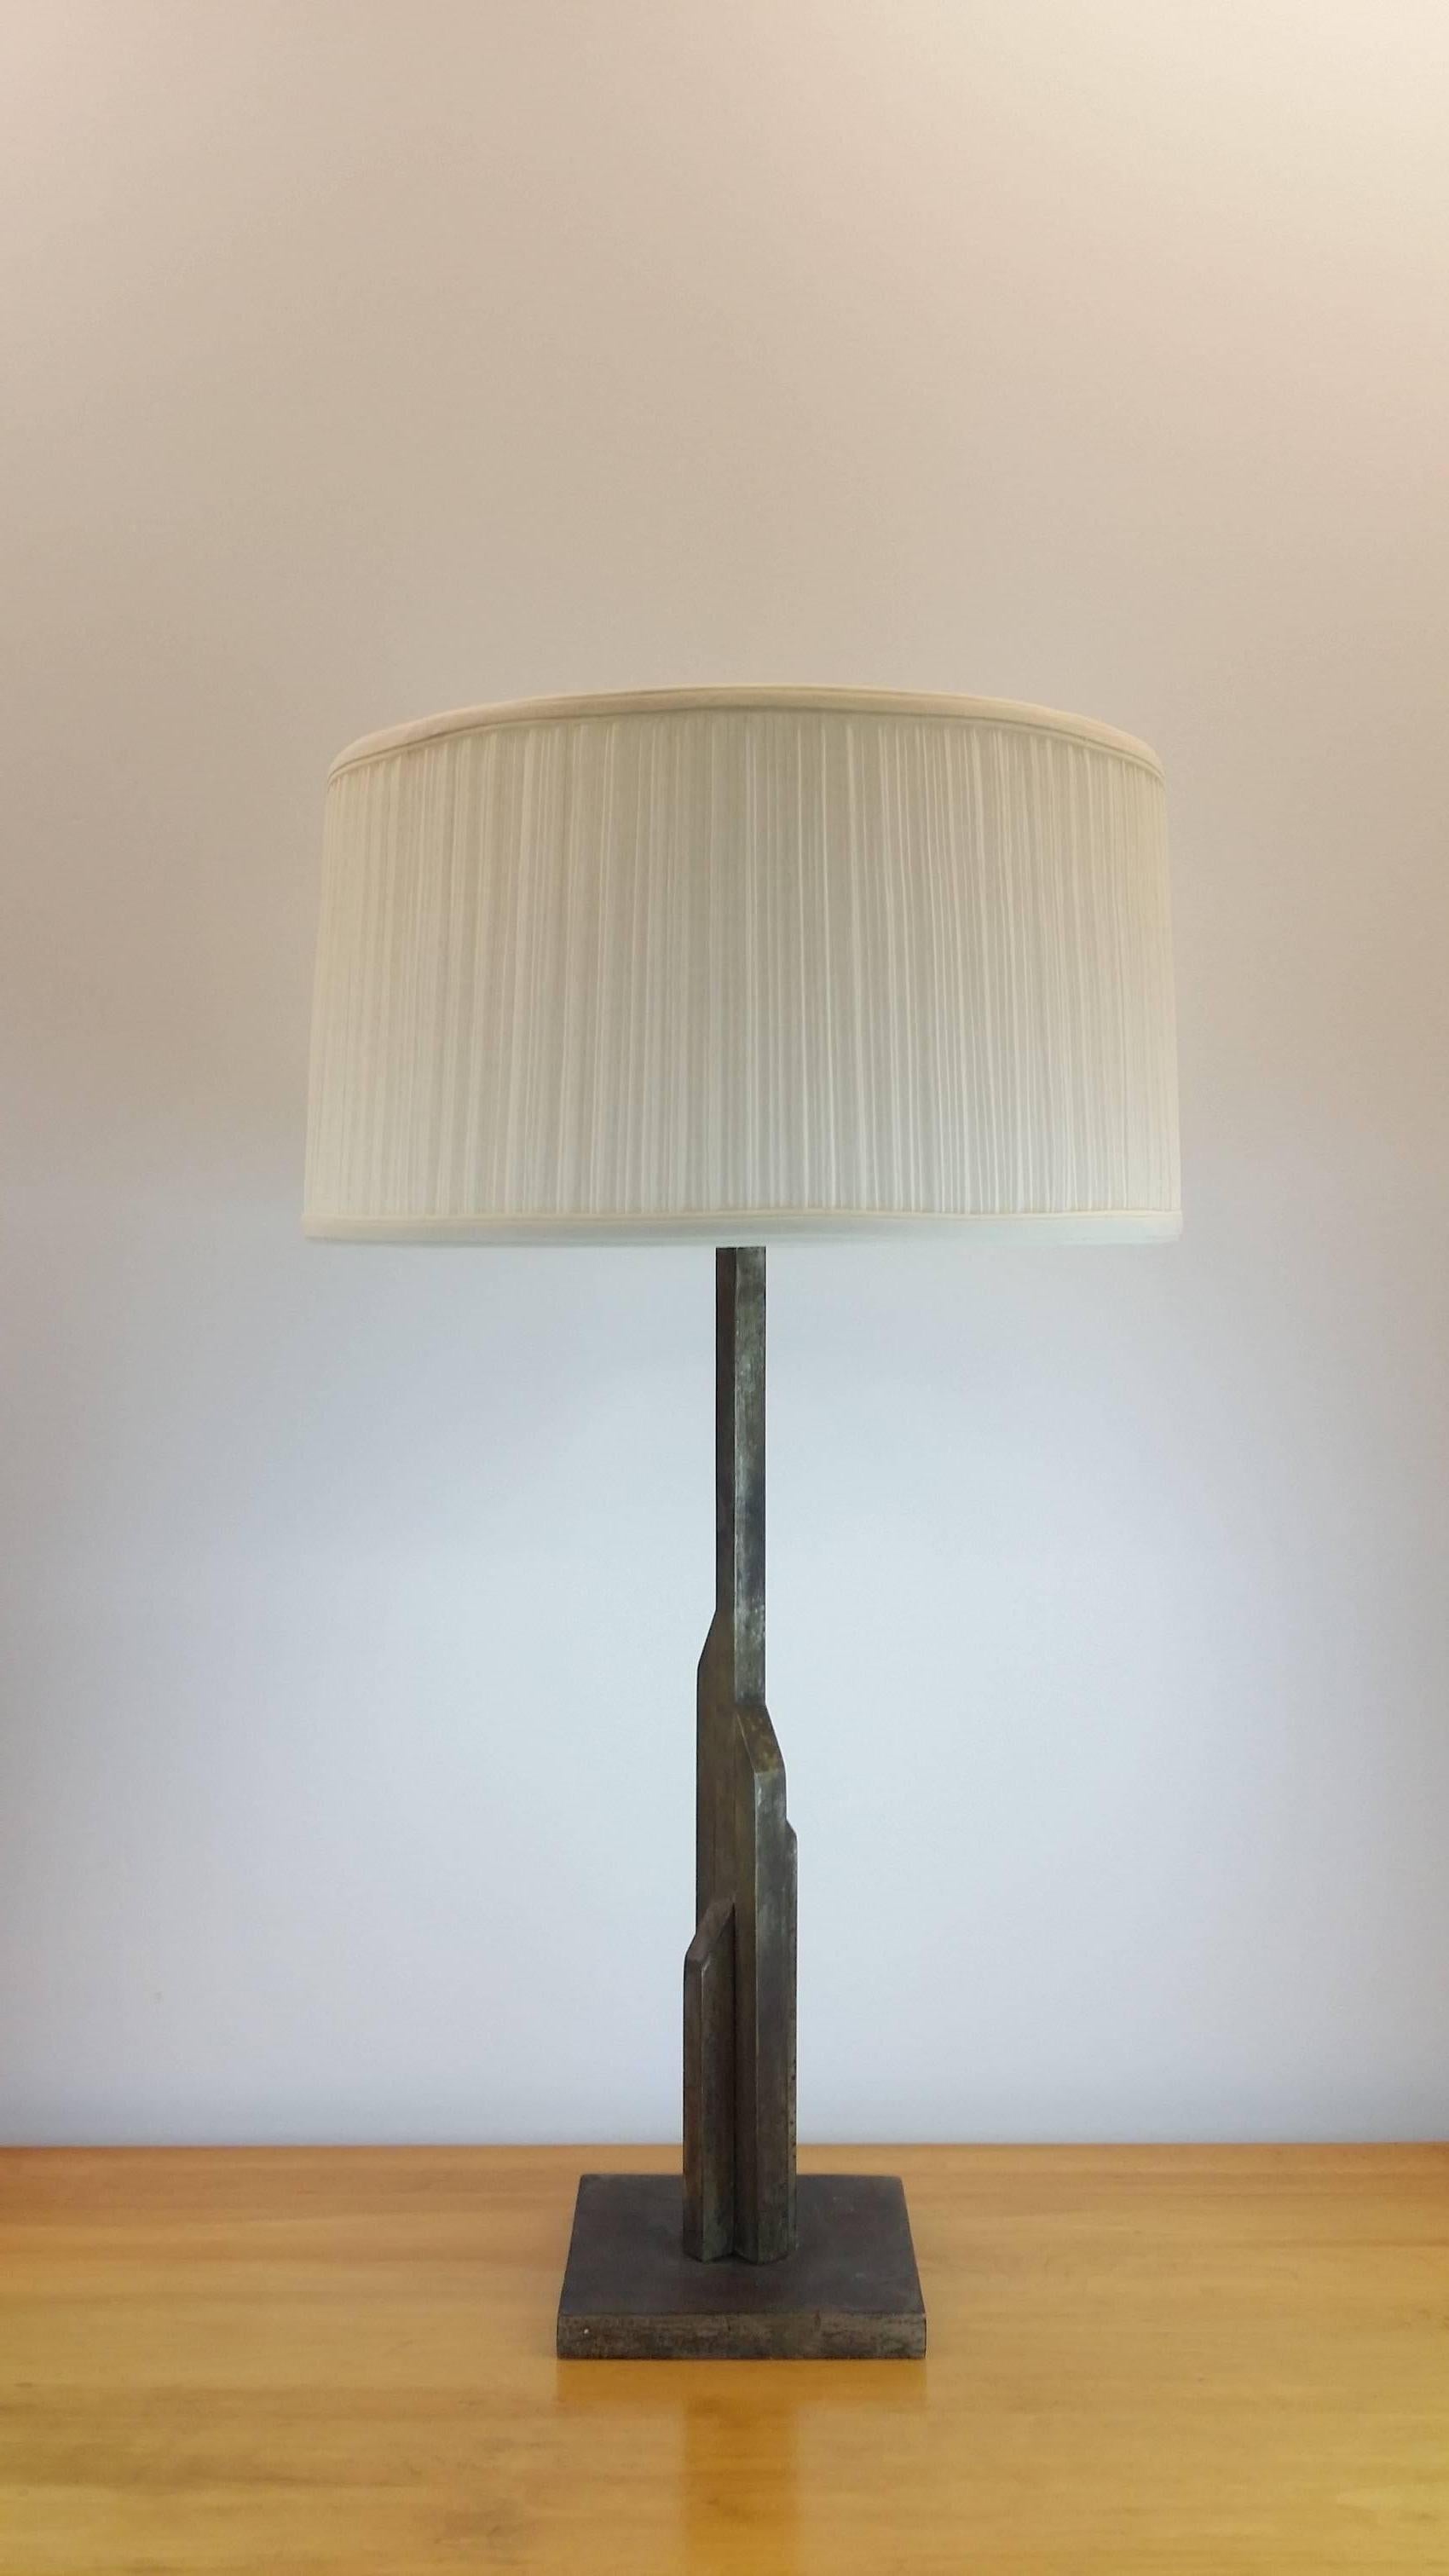 Large deco skyscraper style table lamp in the manner of Jules Bouy, circa 1935. As with all of our vintage lighting, this has been professionally rewired for safety, including a high quality in-line rocker switch. Measures: Stands 31 1/2